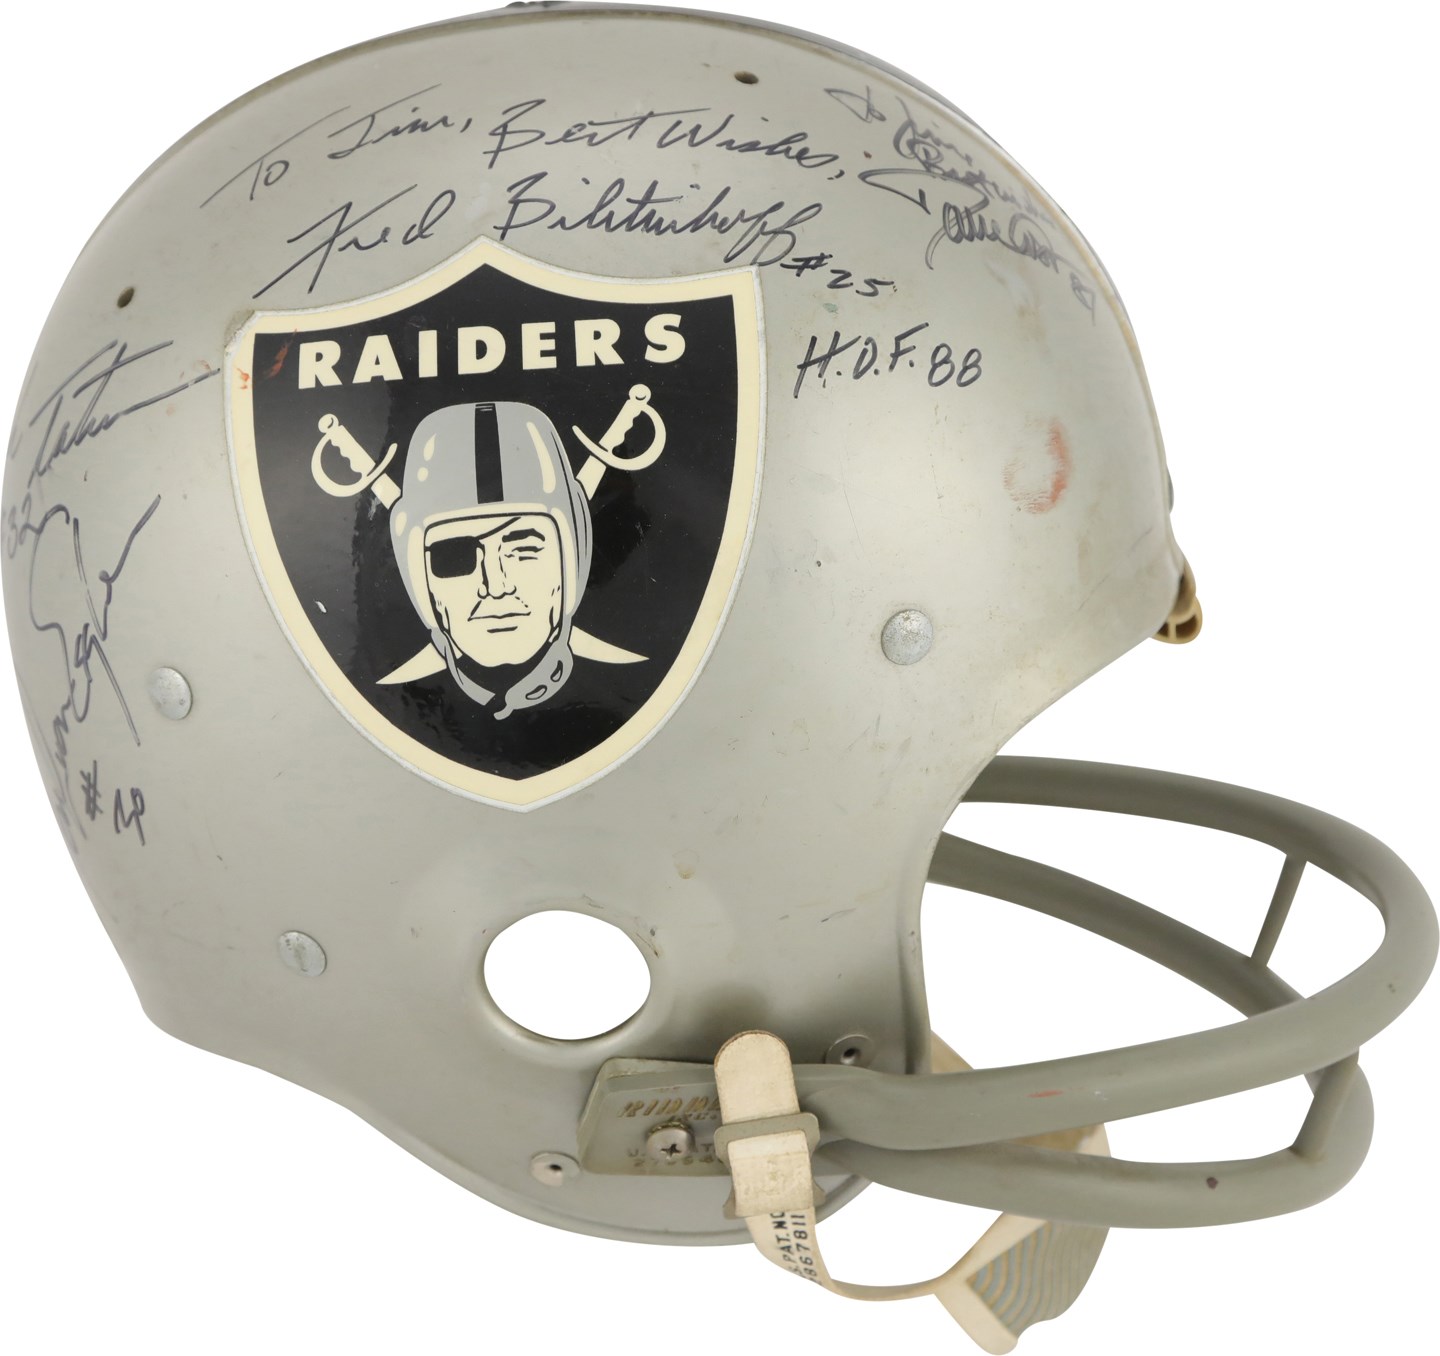 Football - Early 1970s Oakland Raiders Greats Signed Game Used Helmet